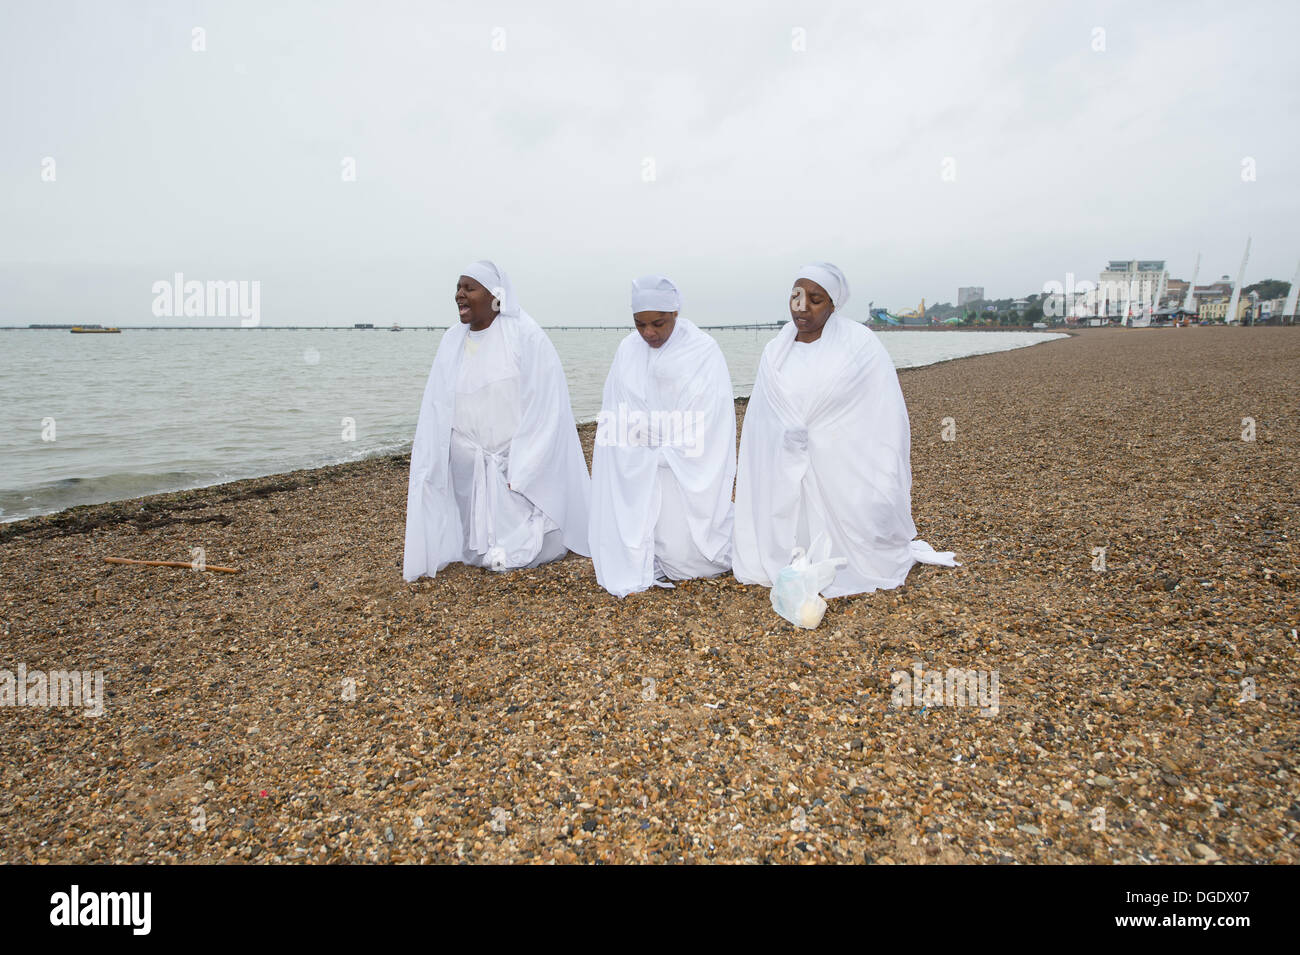 Southend, Essex, UK. 19th October 2013. On the beach at the Essex resort, dark wet weather fails to prevent prayers by the Christian Apostles. An African based religion, praying outside brings the members closer to God. Credit:  Allsorts Stock Photo/Alamy Live News Stock Photo